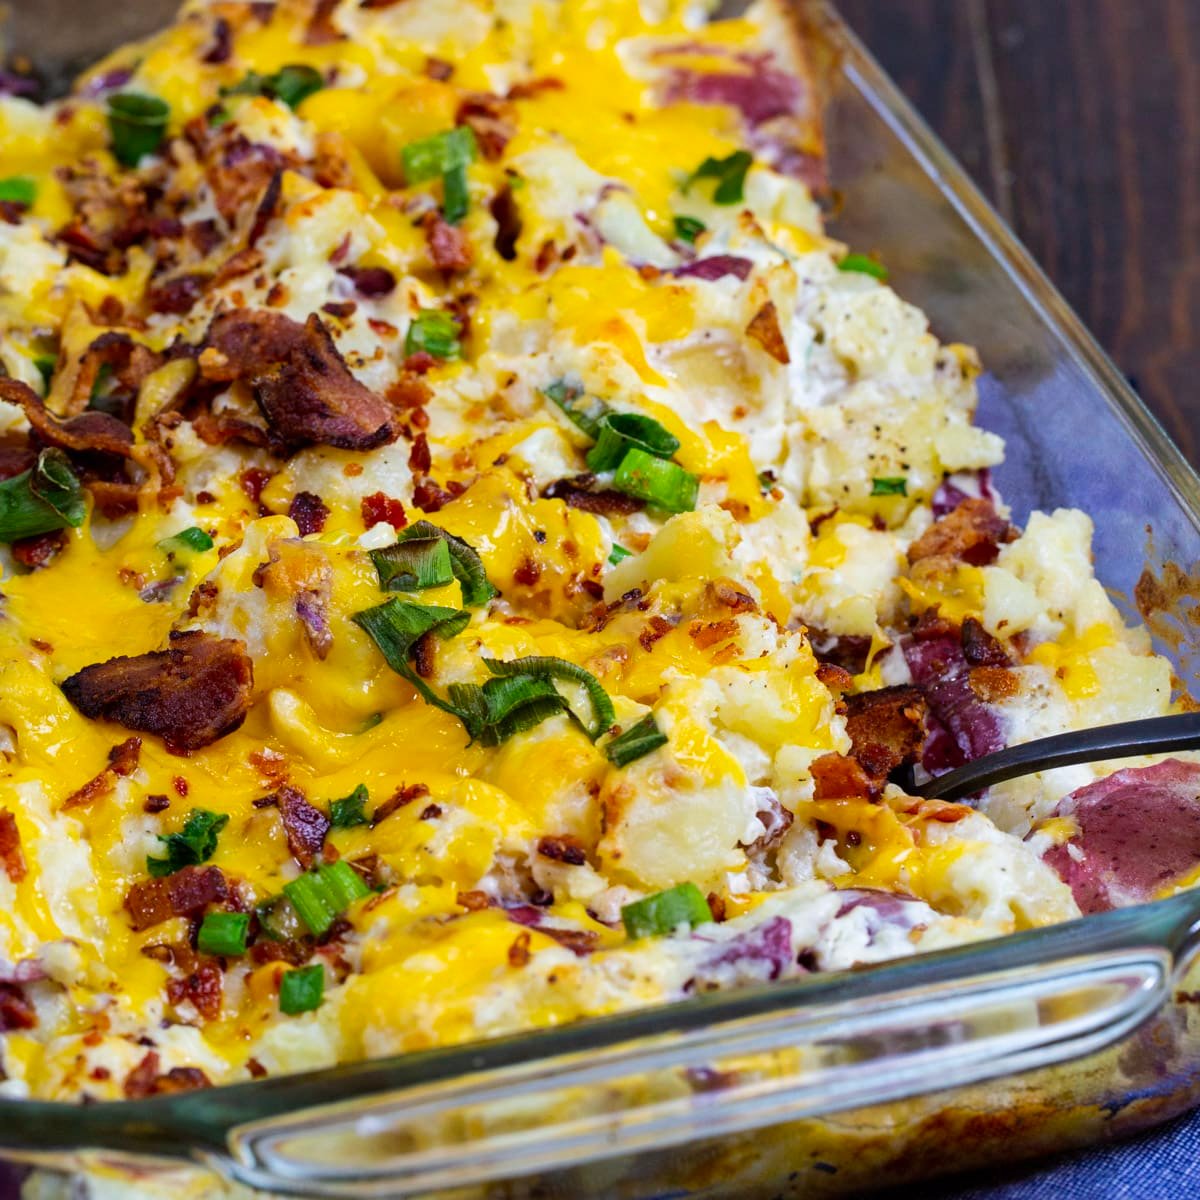 Loaded Smashed Potato Casserole in a baking dish.